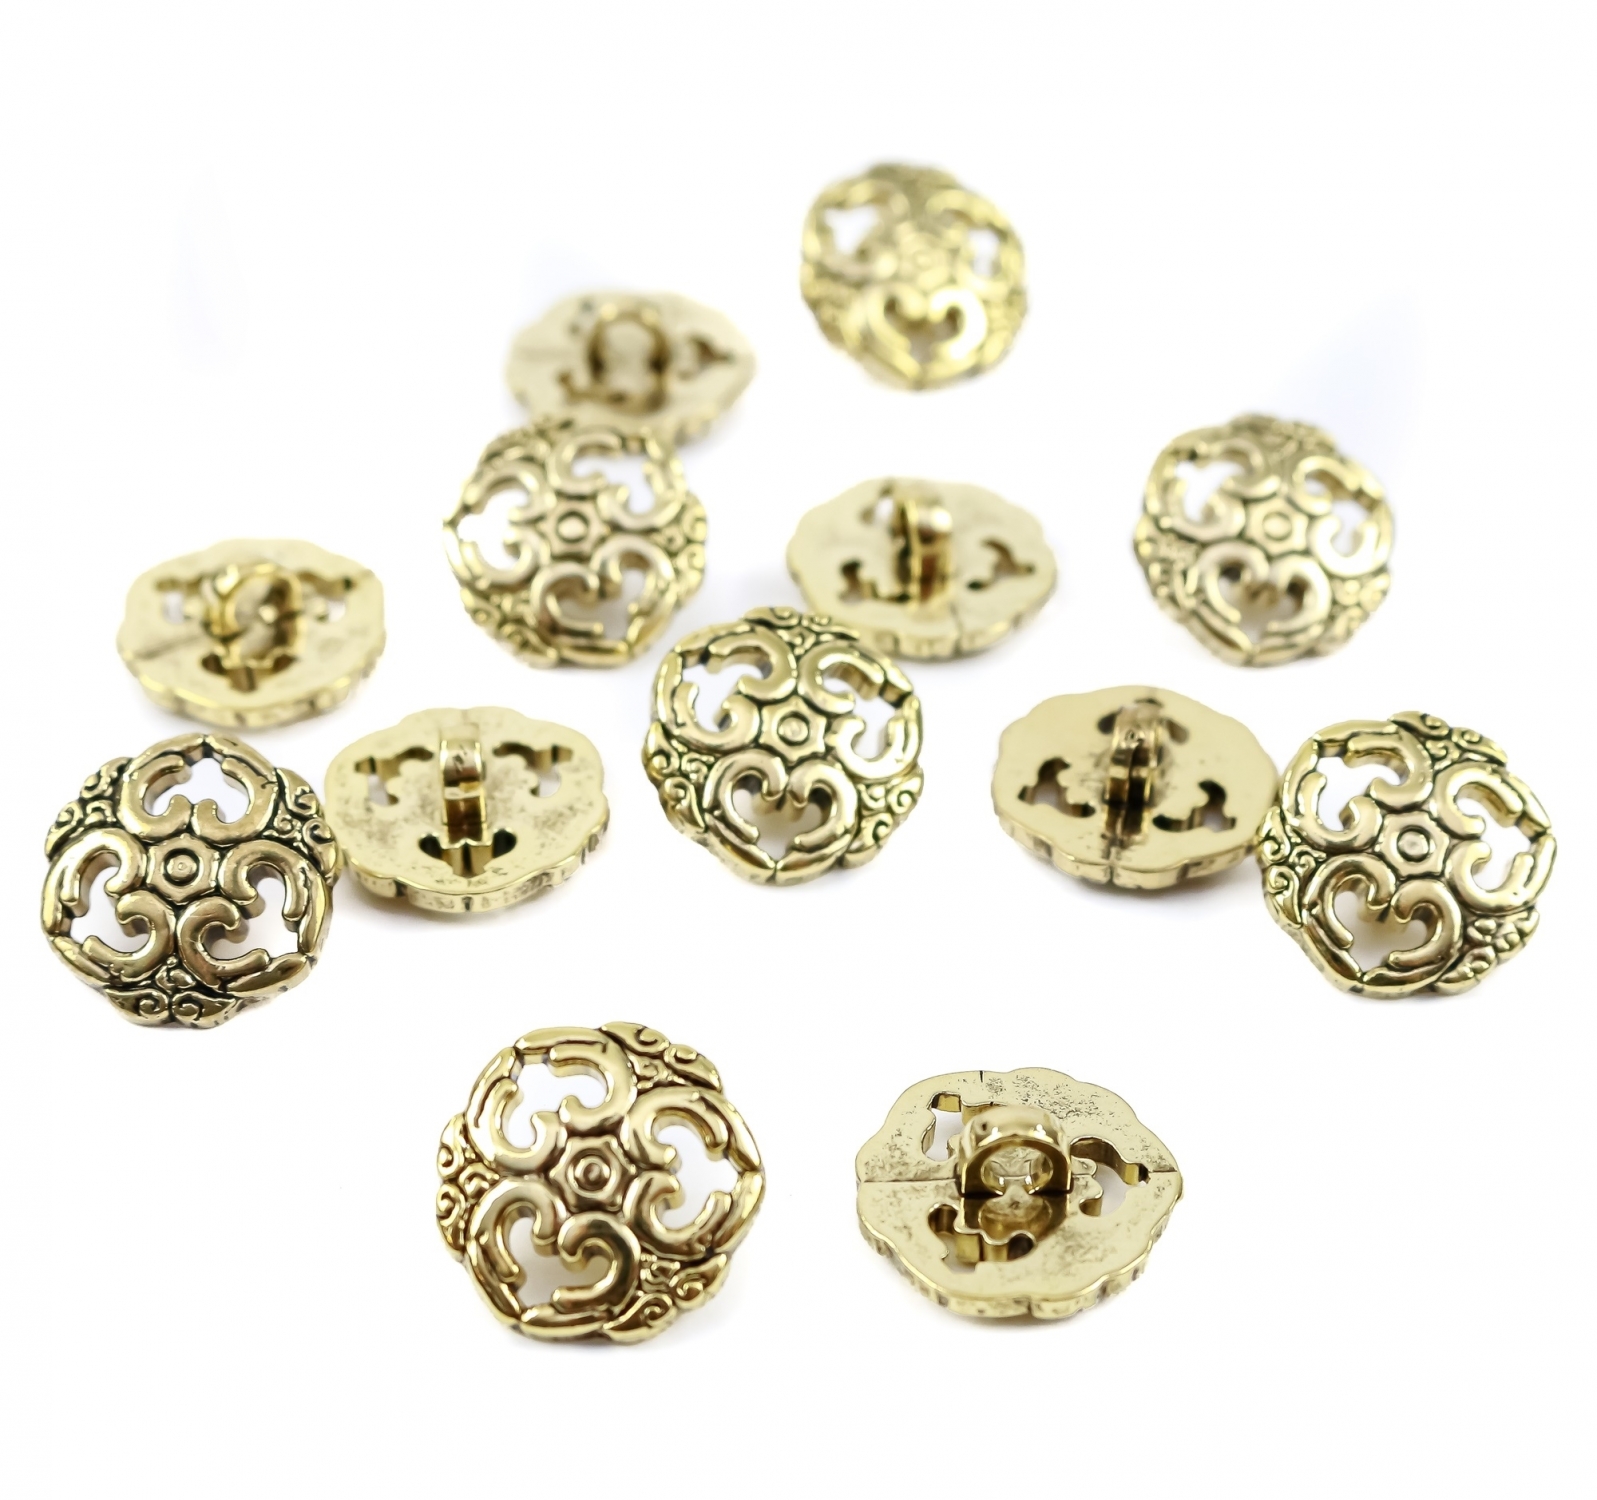 Plastic Shank Buttons, Size: 15 mm (144 pcs/pack)Code: 58904/15MM